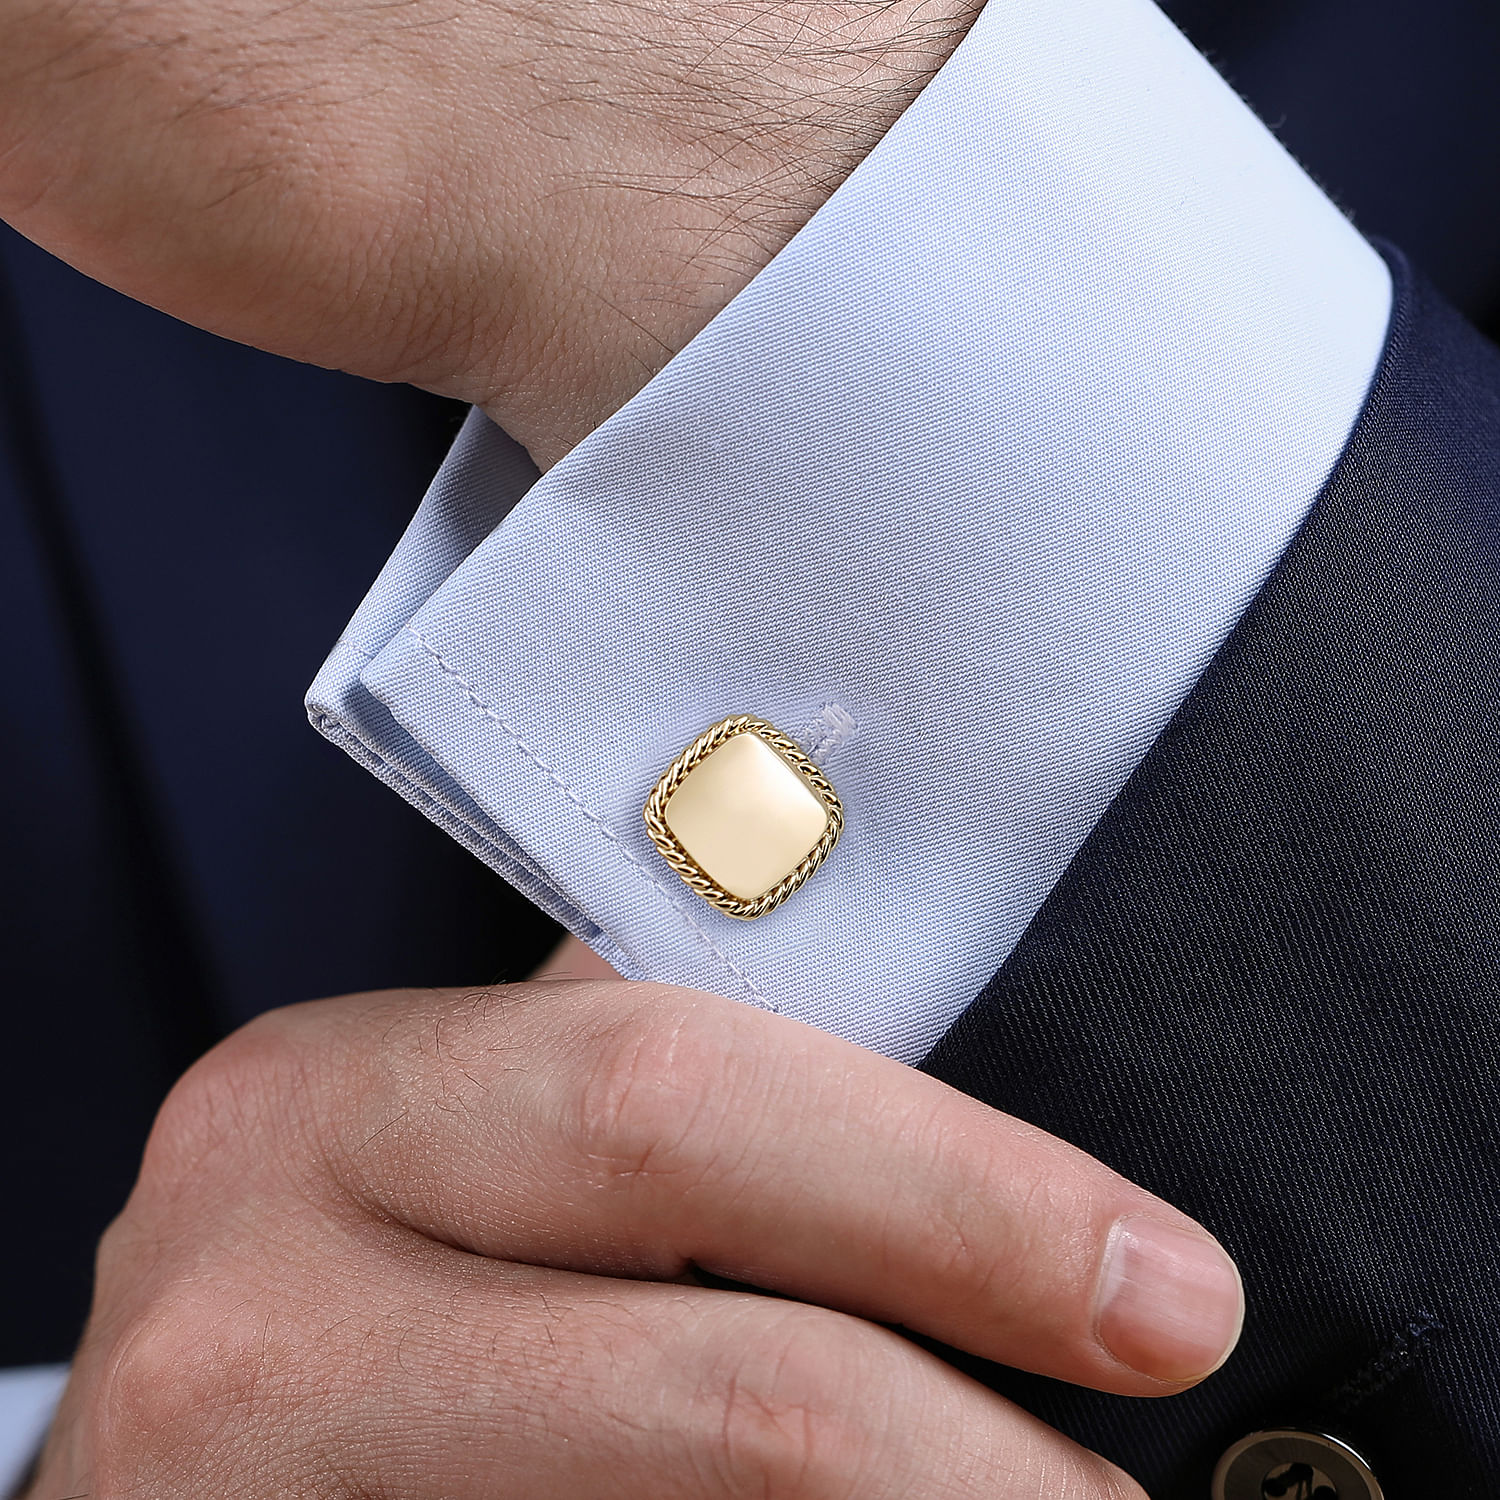 14K Yellow Gold Square Cufflinks with Twisted Rope Trim